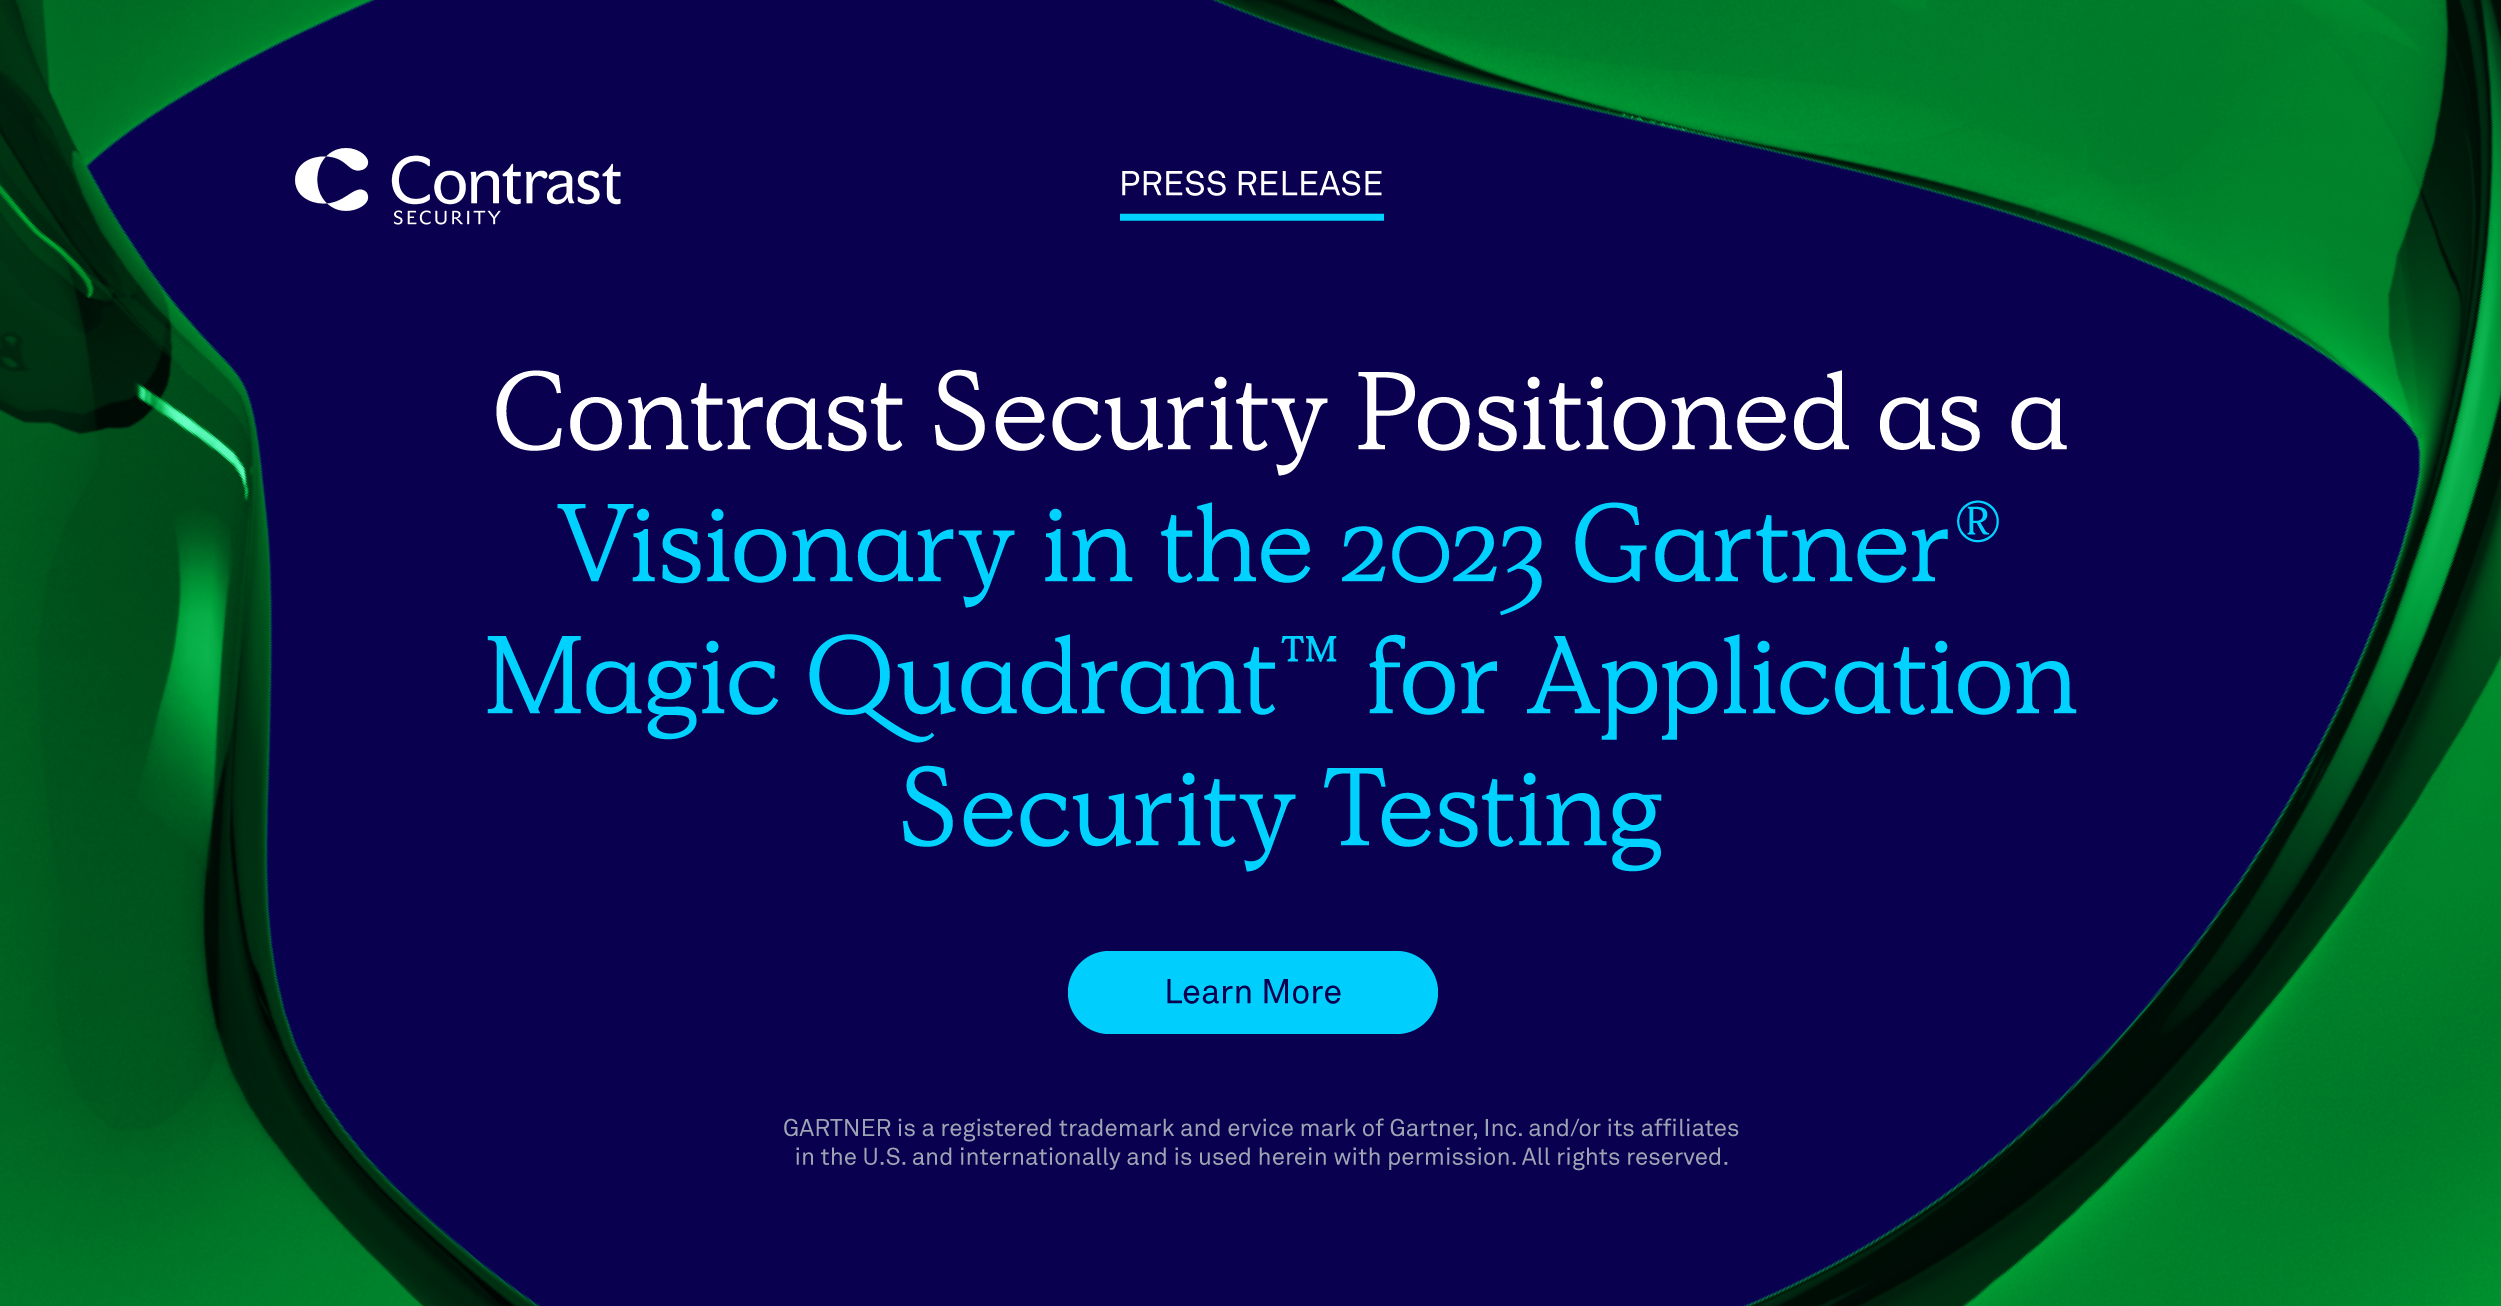 Contrast Security Positioned as a Visionary in the 2023 Gartner® Magic